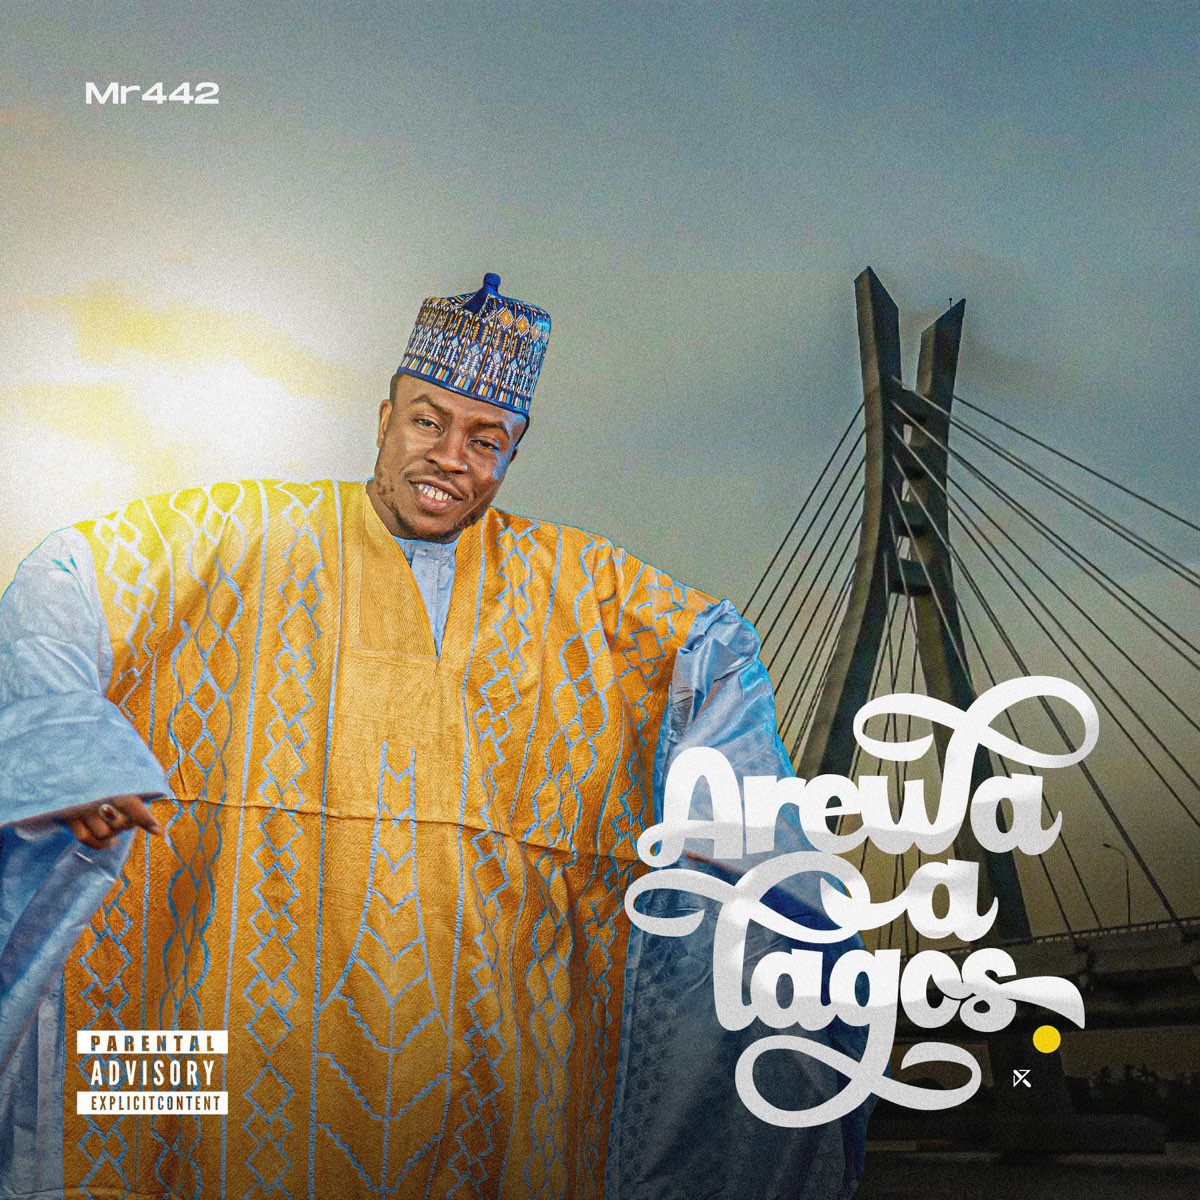 Arewa a Lagos by Mr442 on Apple Music